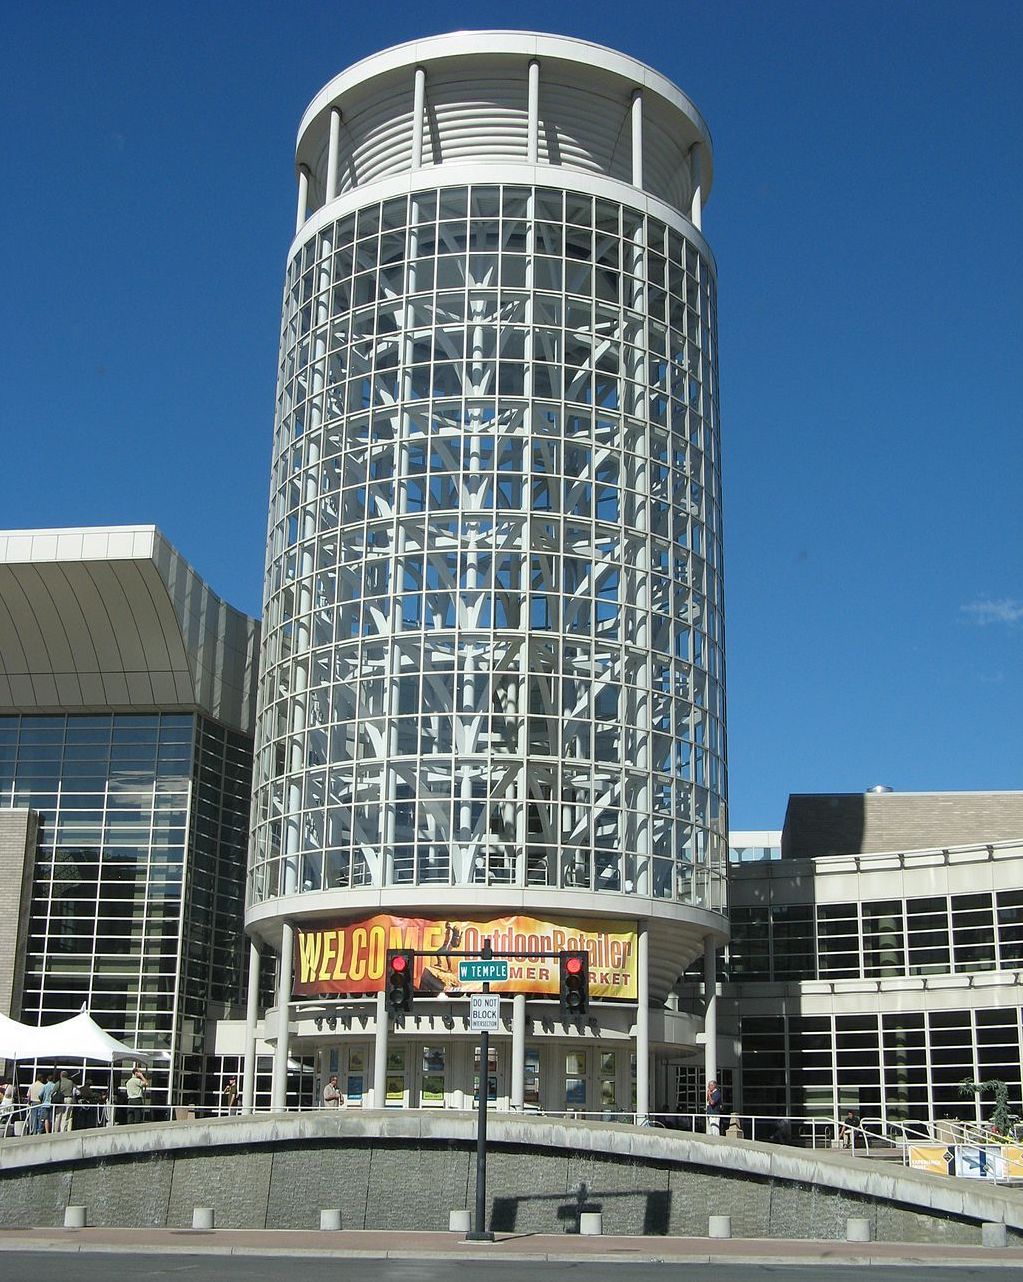 The Salt Palace Convention Center in Salt Lake City, Utah, will host the Outdoor Retailer at least one more time this July. [Photo] hakkun, Wikimedia